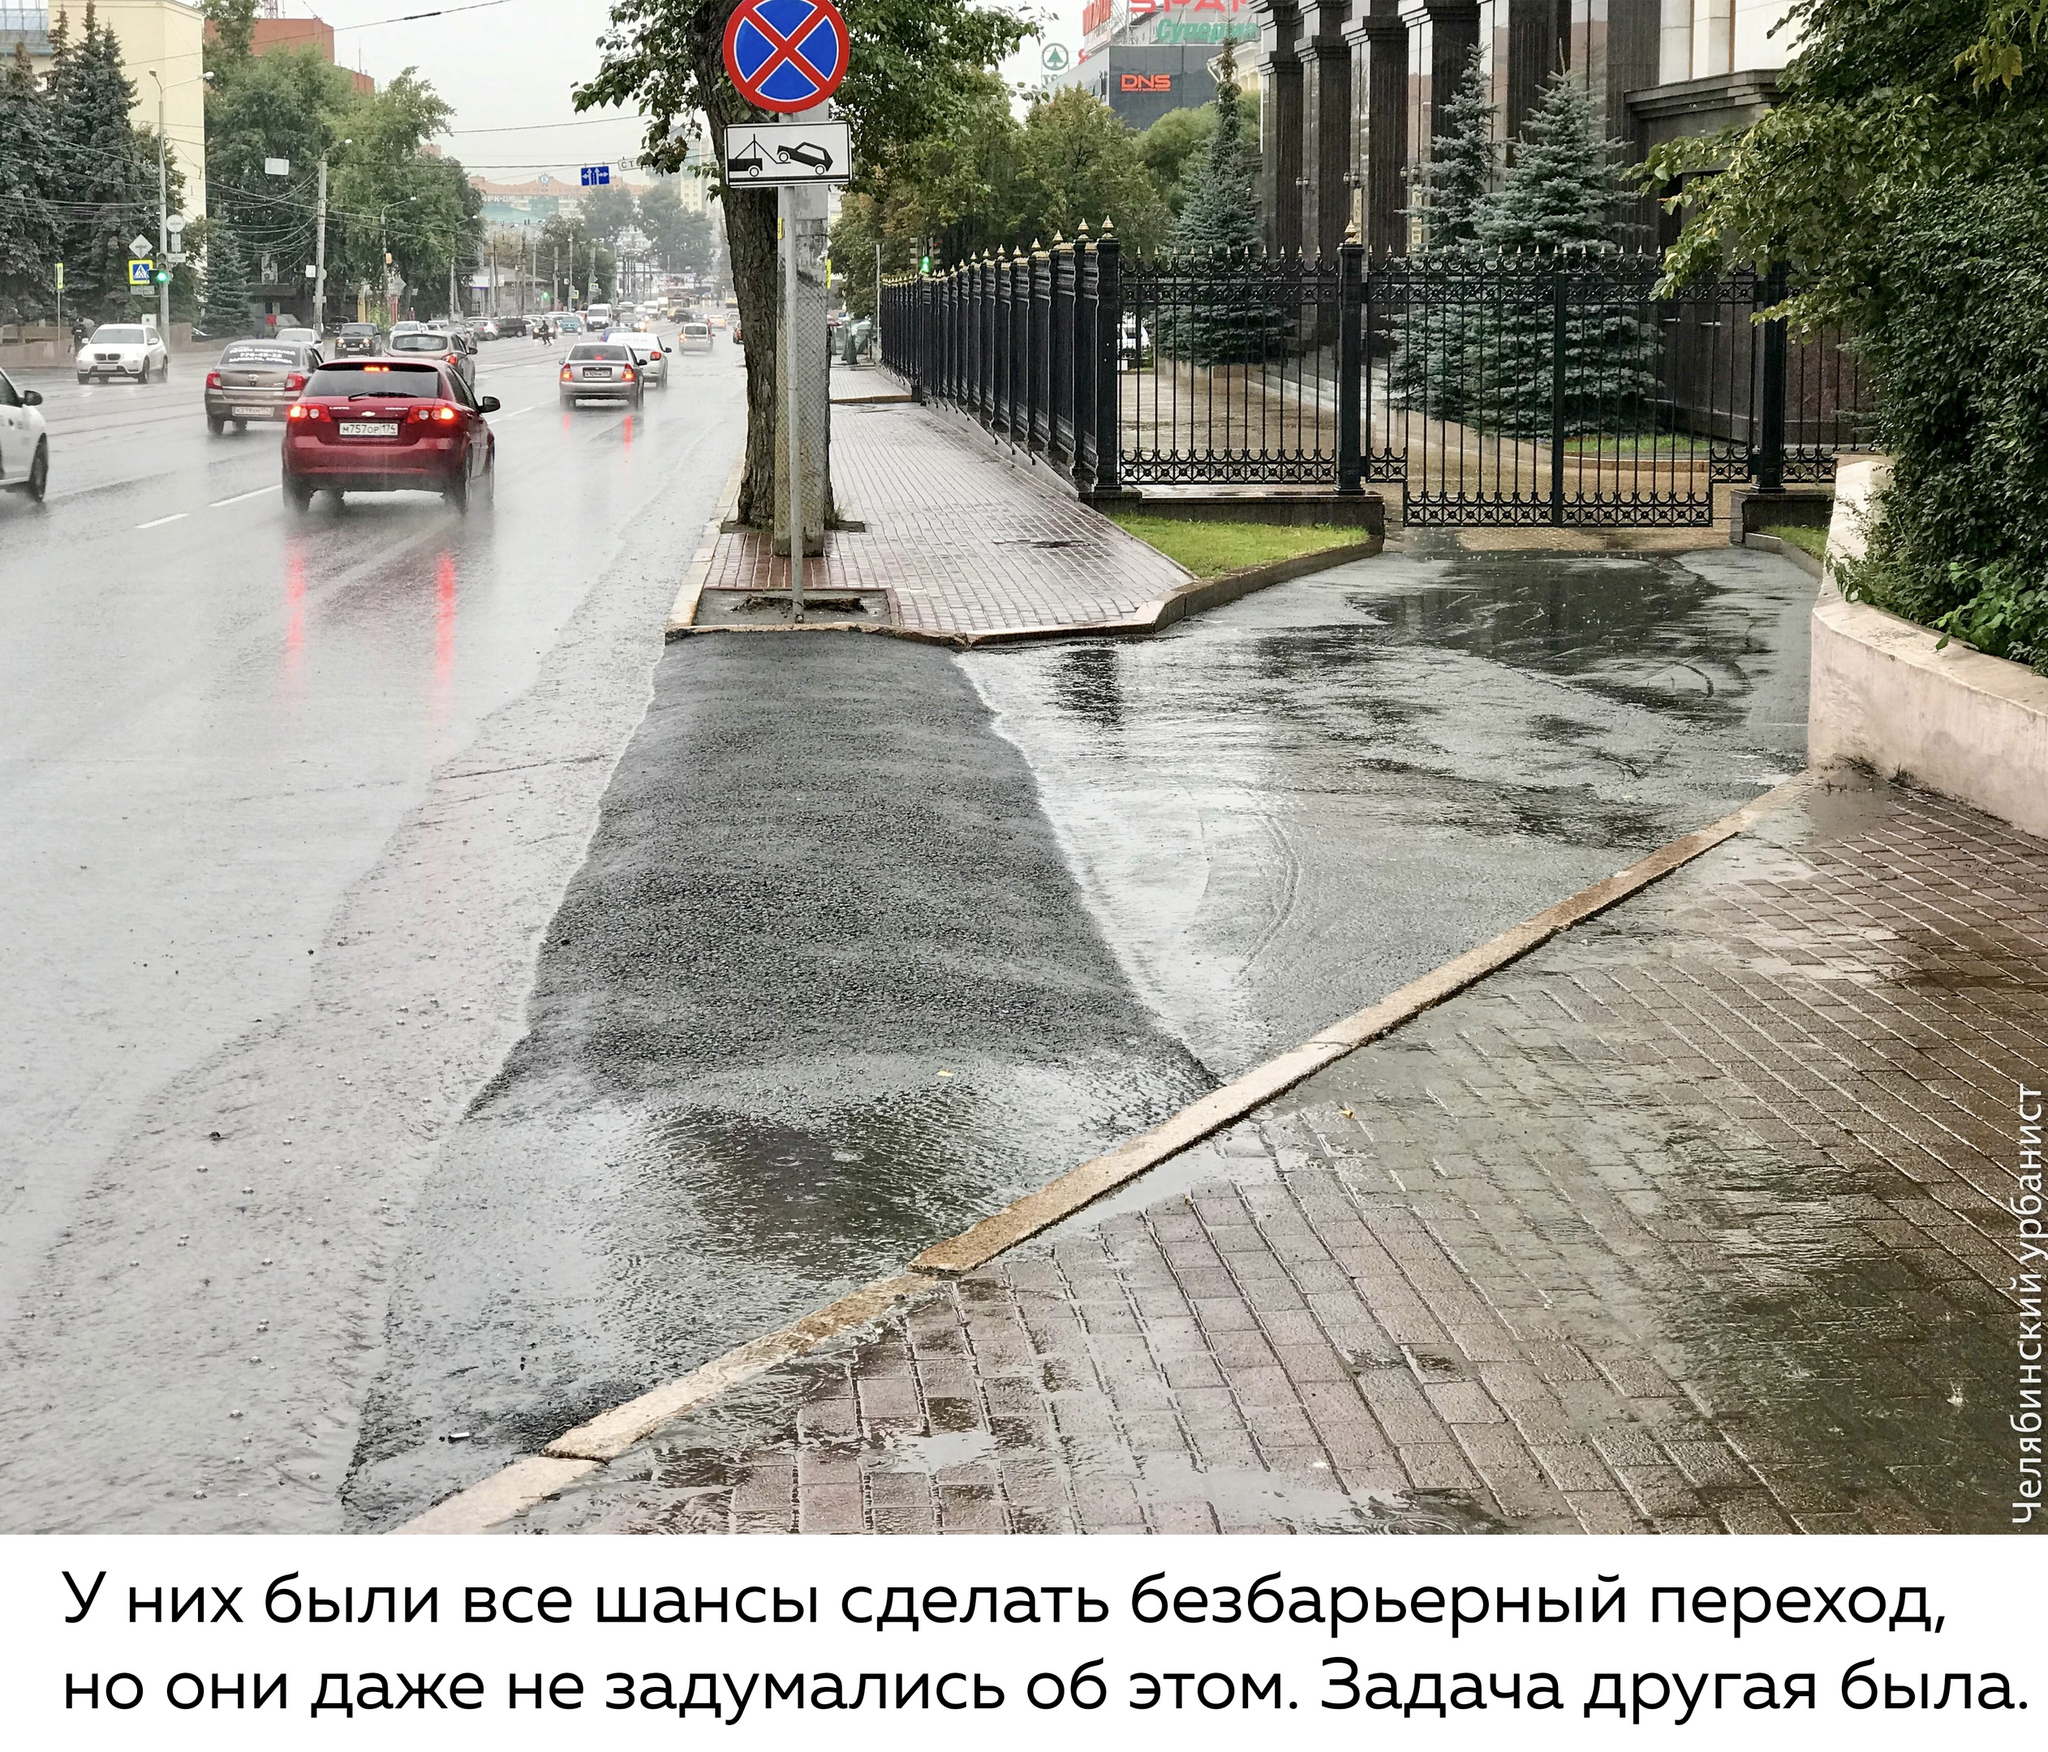 How one puddle dominates the Government of the Chelyabinsk region - My, Chelyabinsk, Chelyabinsk urbanist, Puddle, Sidewalk, Road, Officials, Wastewater, Longpost